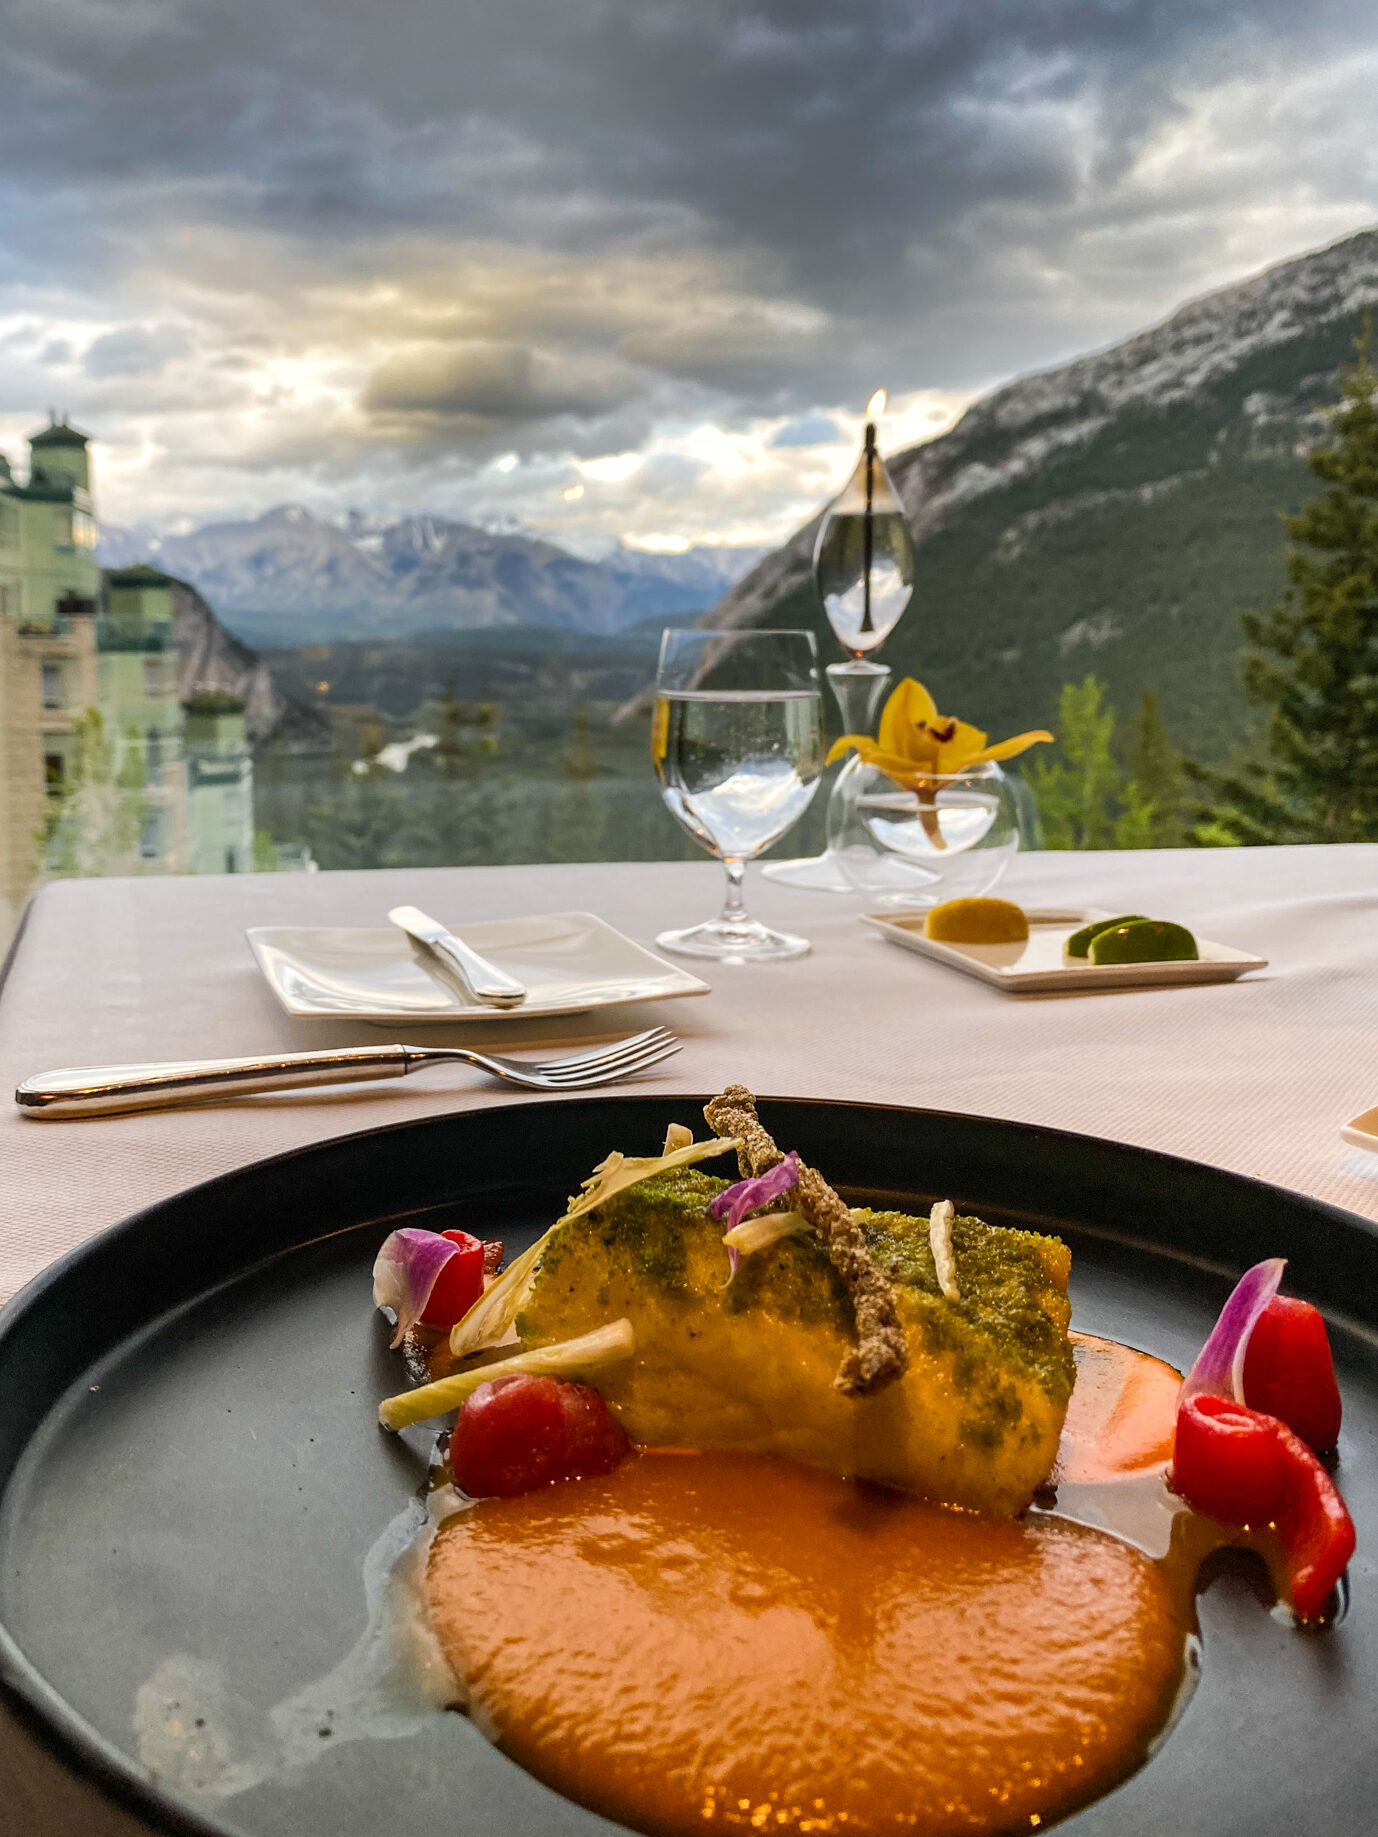 The Halibut Entree from Eden enjoyed with a view of Cascade Mountain